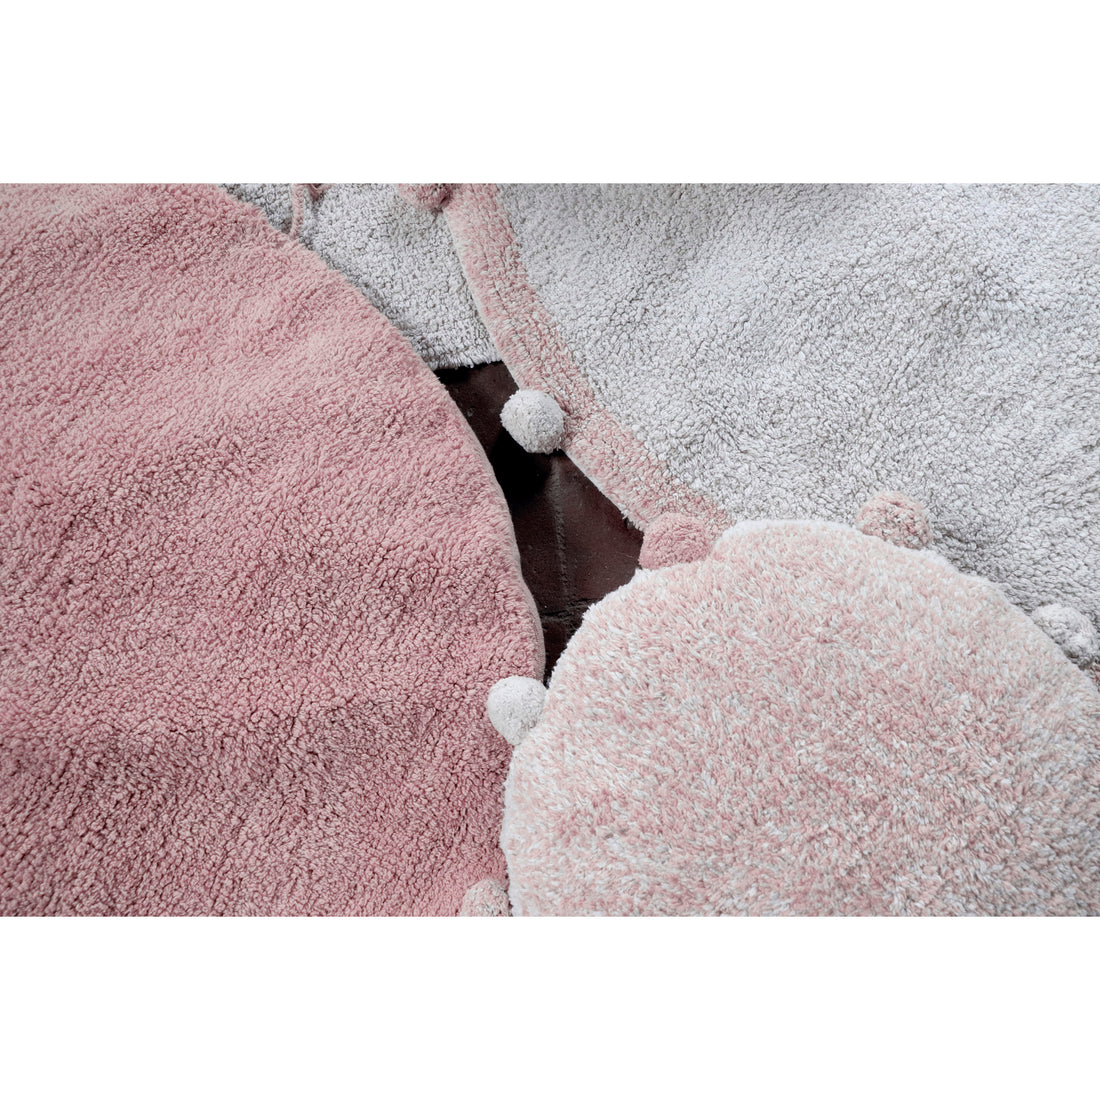 lorena-canals-re-edition-bubbly-vintage-nude-machine-washable-floor-cushion- (5)